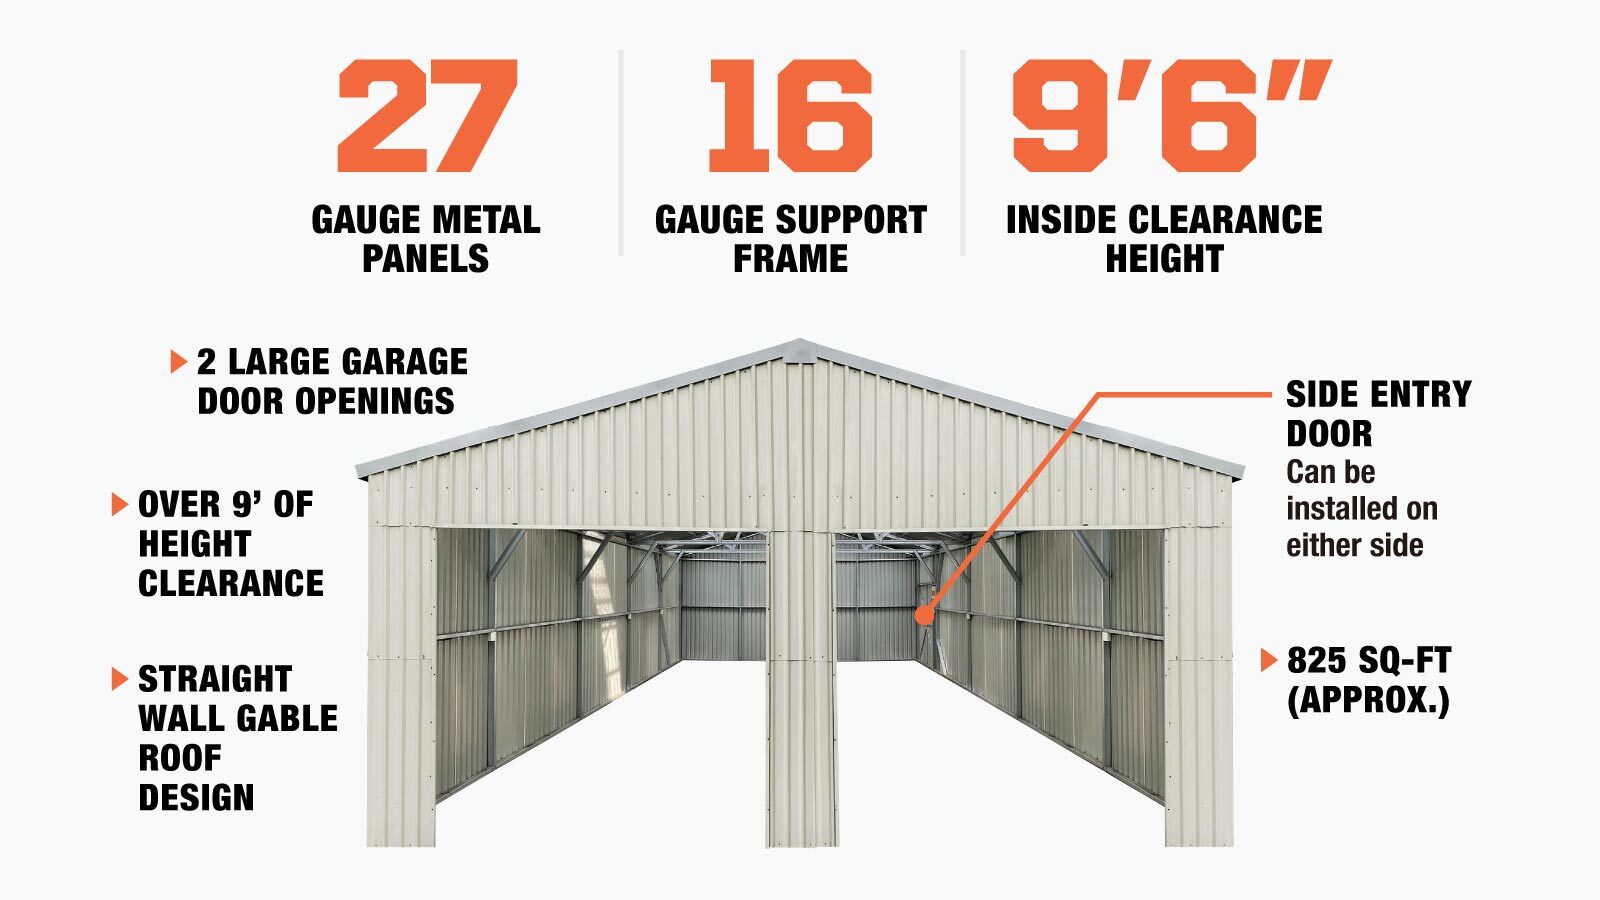 TMG Industrial 25’ x 33’ Double Garage Metal Barn Shed with Side Entry Door, 825 Sq-Ft Floor Space, 9’8” Eave Height, 27 GA Metal, Skylights, 4/12 Roof Pitch, TMG-MS2533-description-image